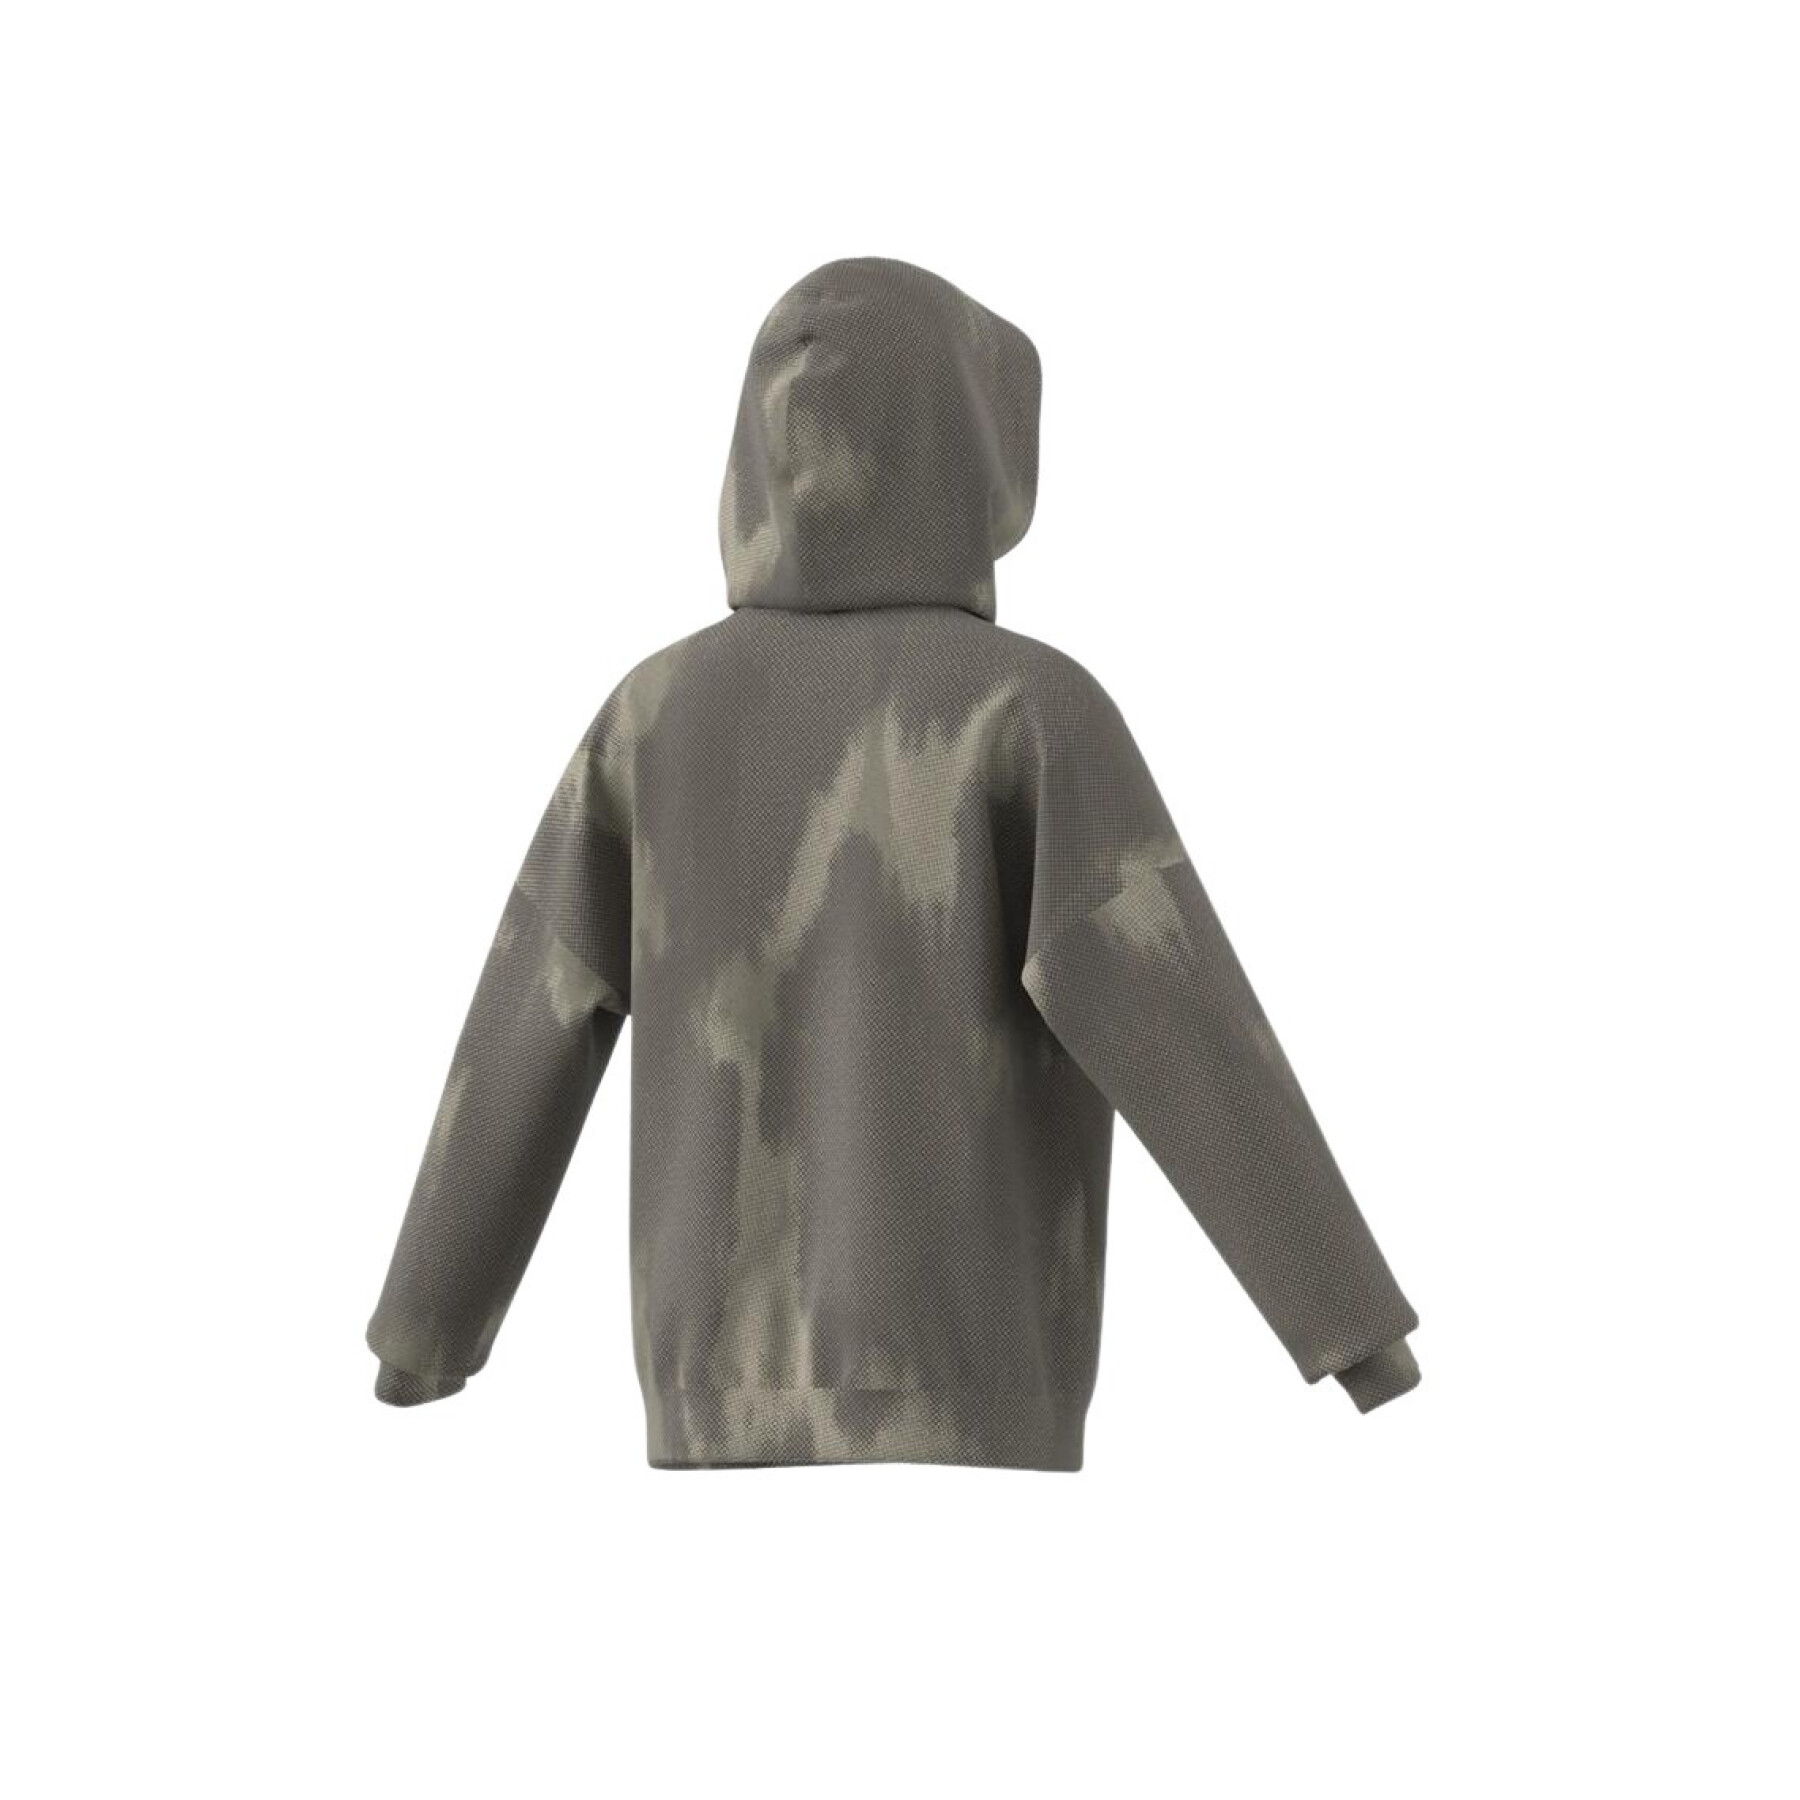 Hoodie Kinder adidas Future Icons All Over Print